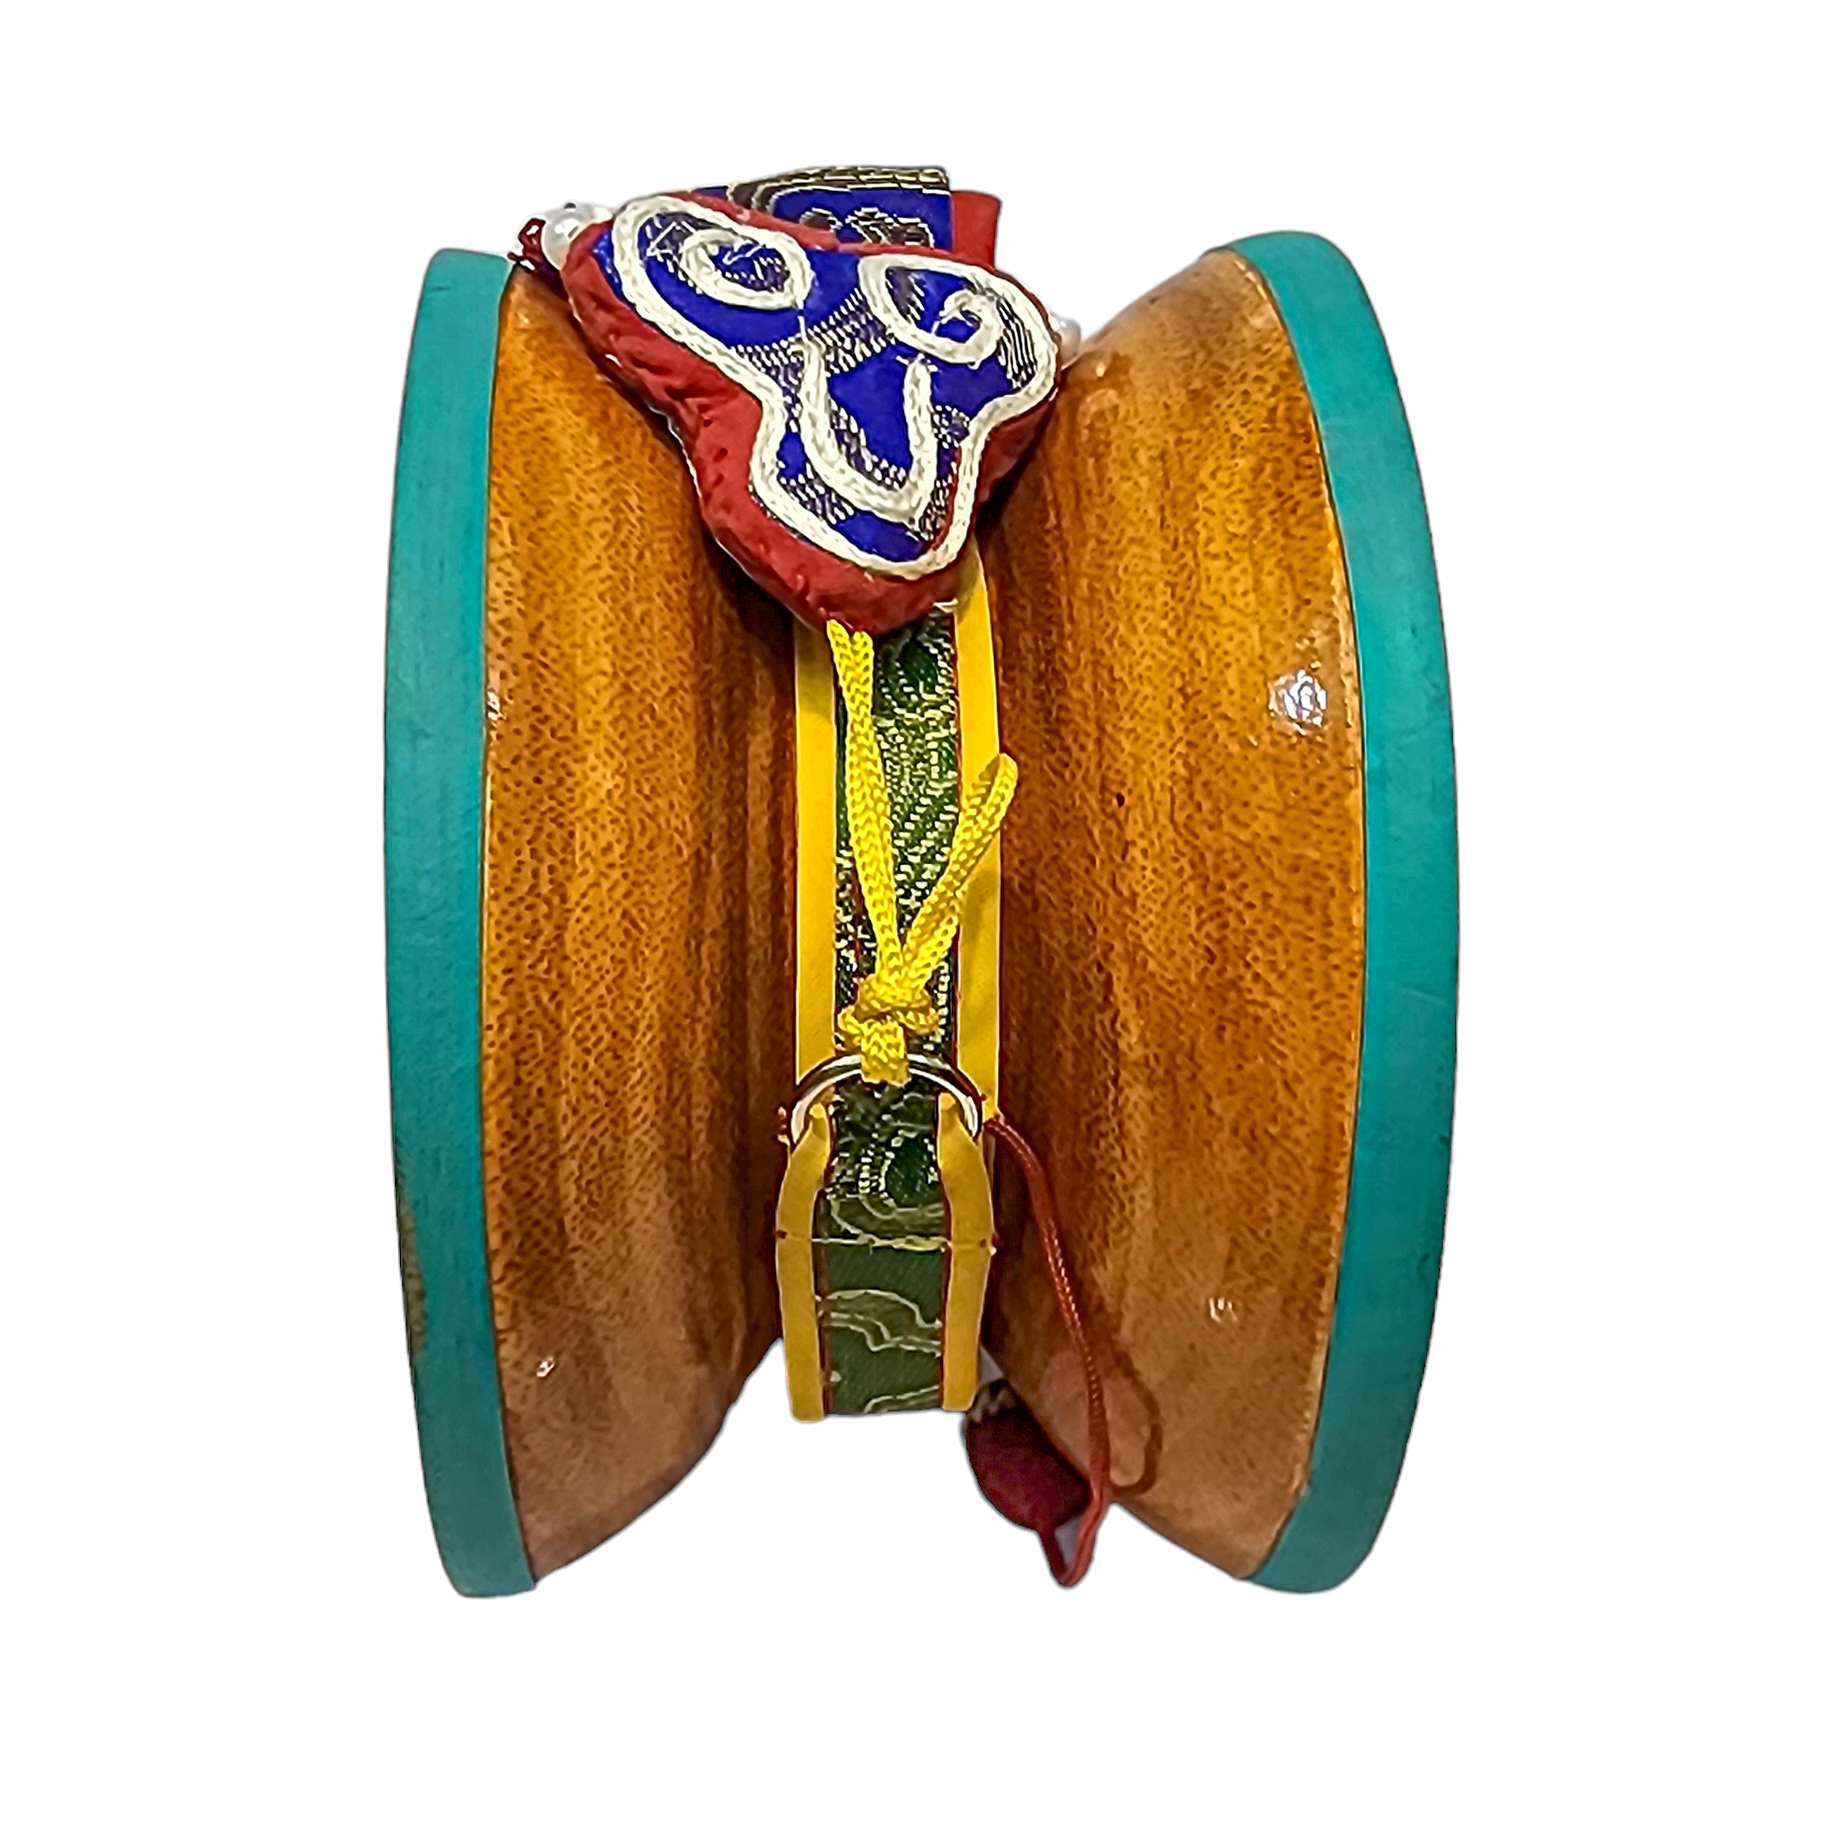 Tibetan Chod Damaru - Wooden And Leather, With Brocade Damaru Drum Cover And Damaru Brocade Tail